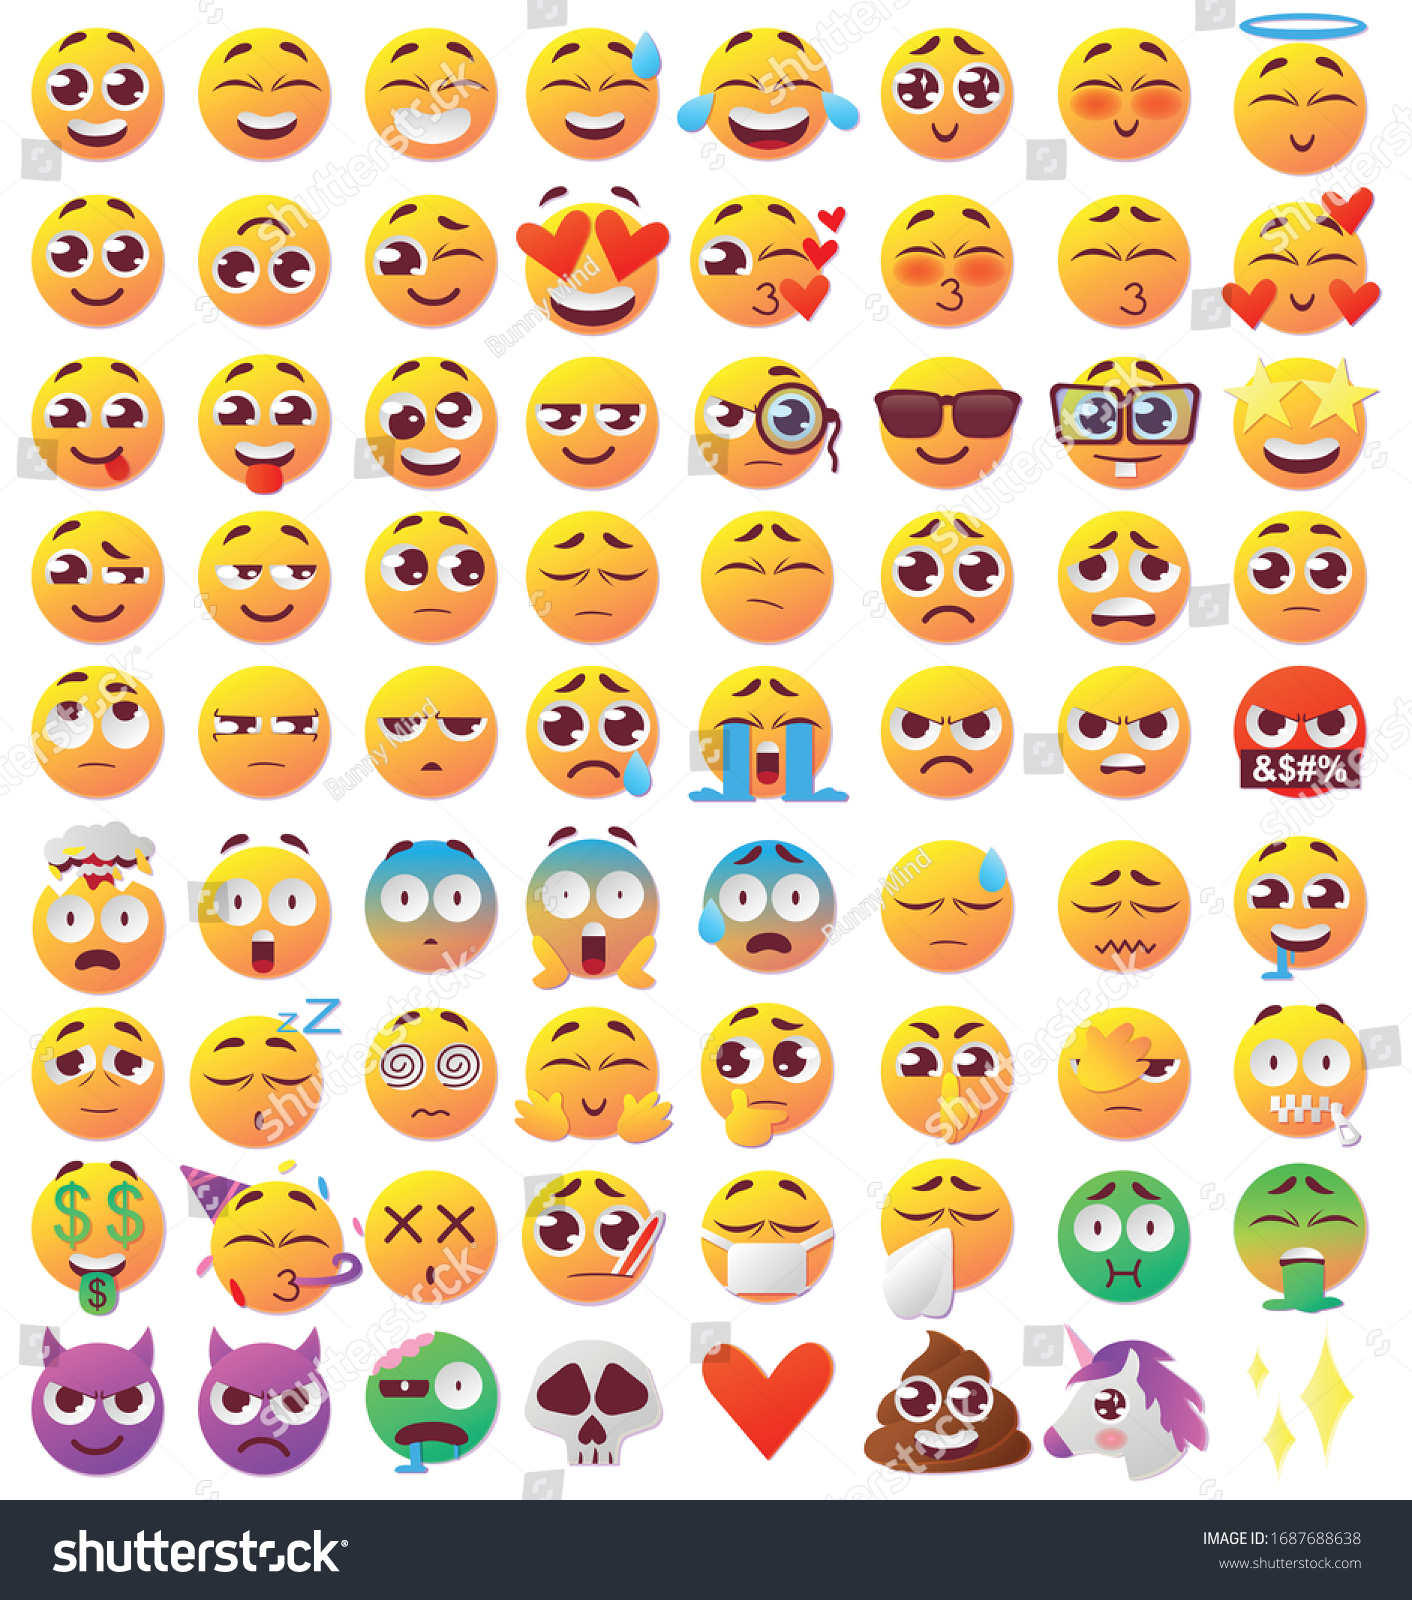 SVG of Set of funny faces with big eyes. Sad, crying, funny, suspicious, angry, smiling faces. Flat design 72 expressions of emotions Kawaii Emoji. Icons with a beautiful gradient. svg